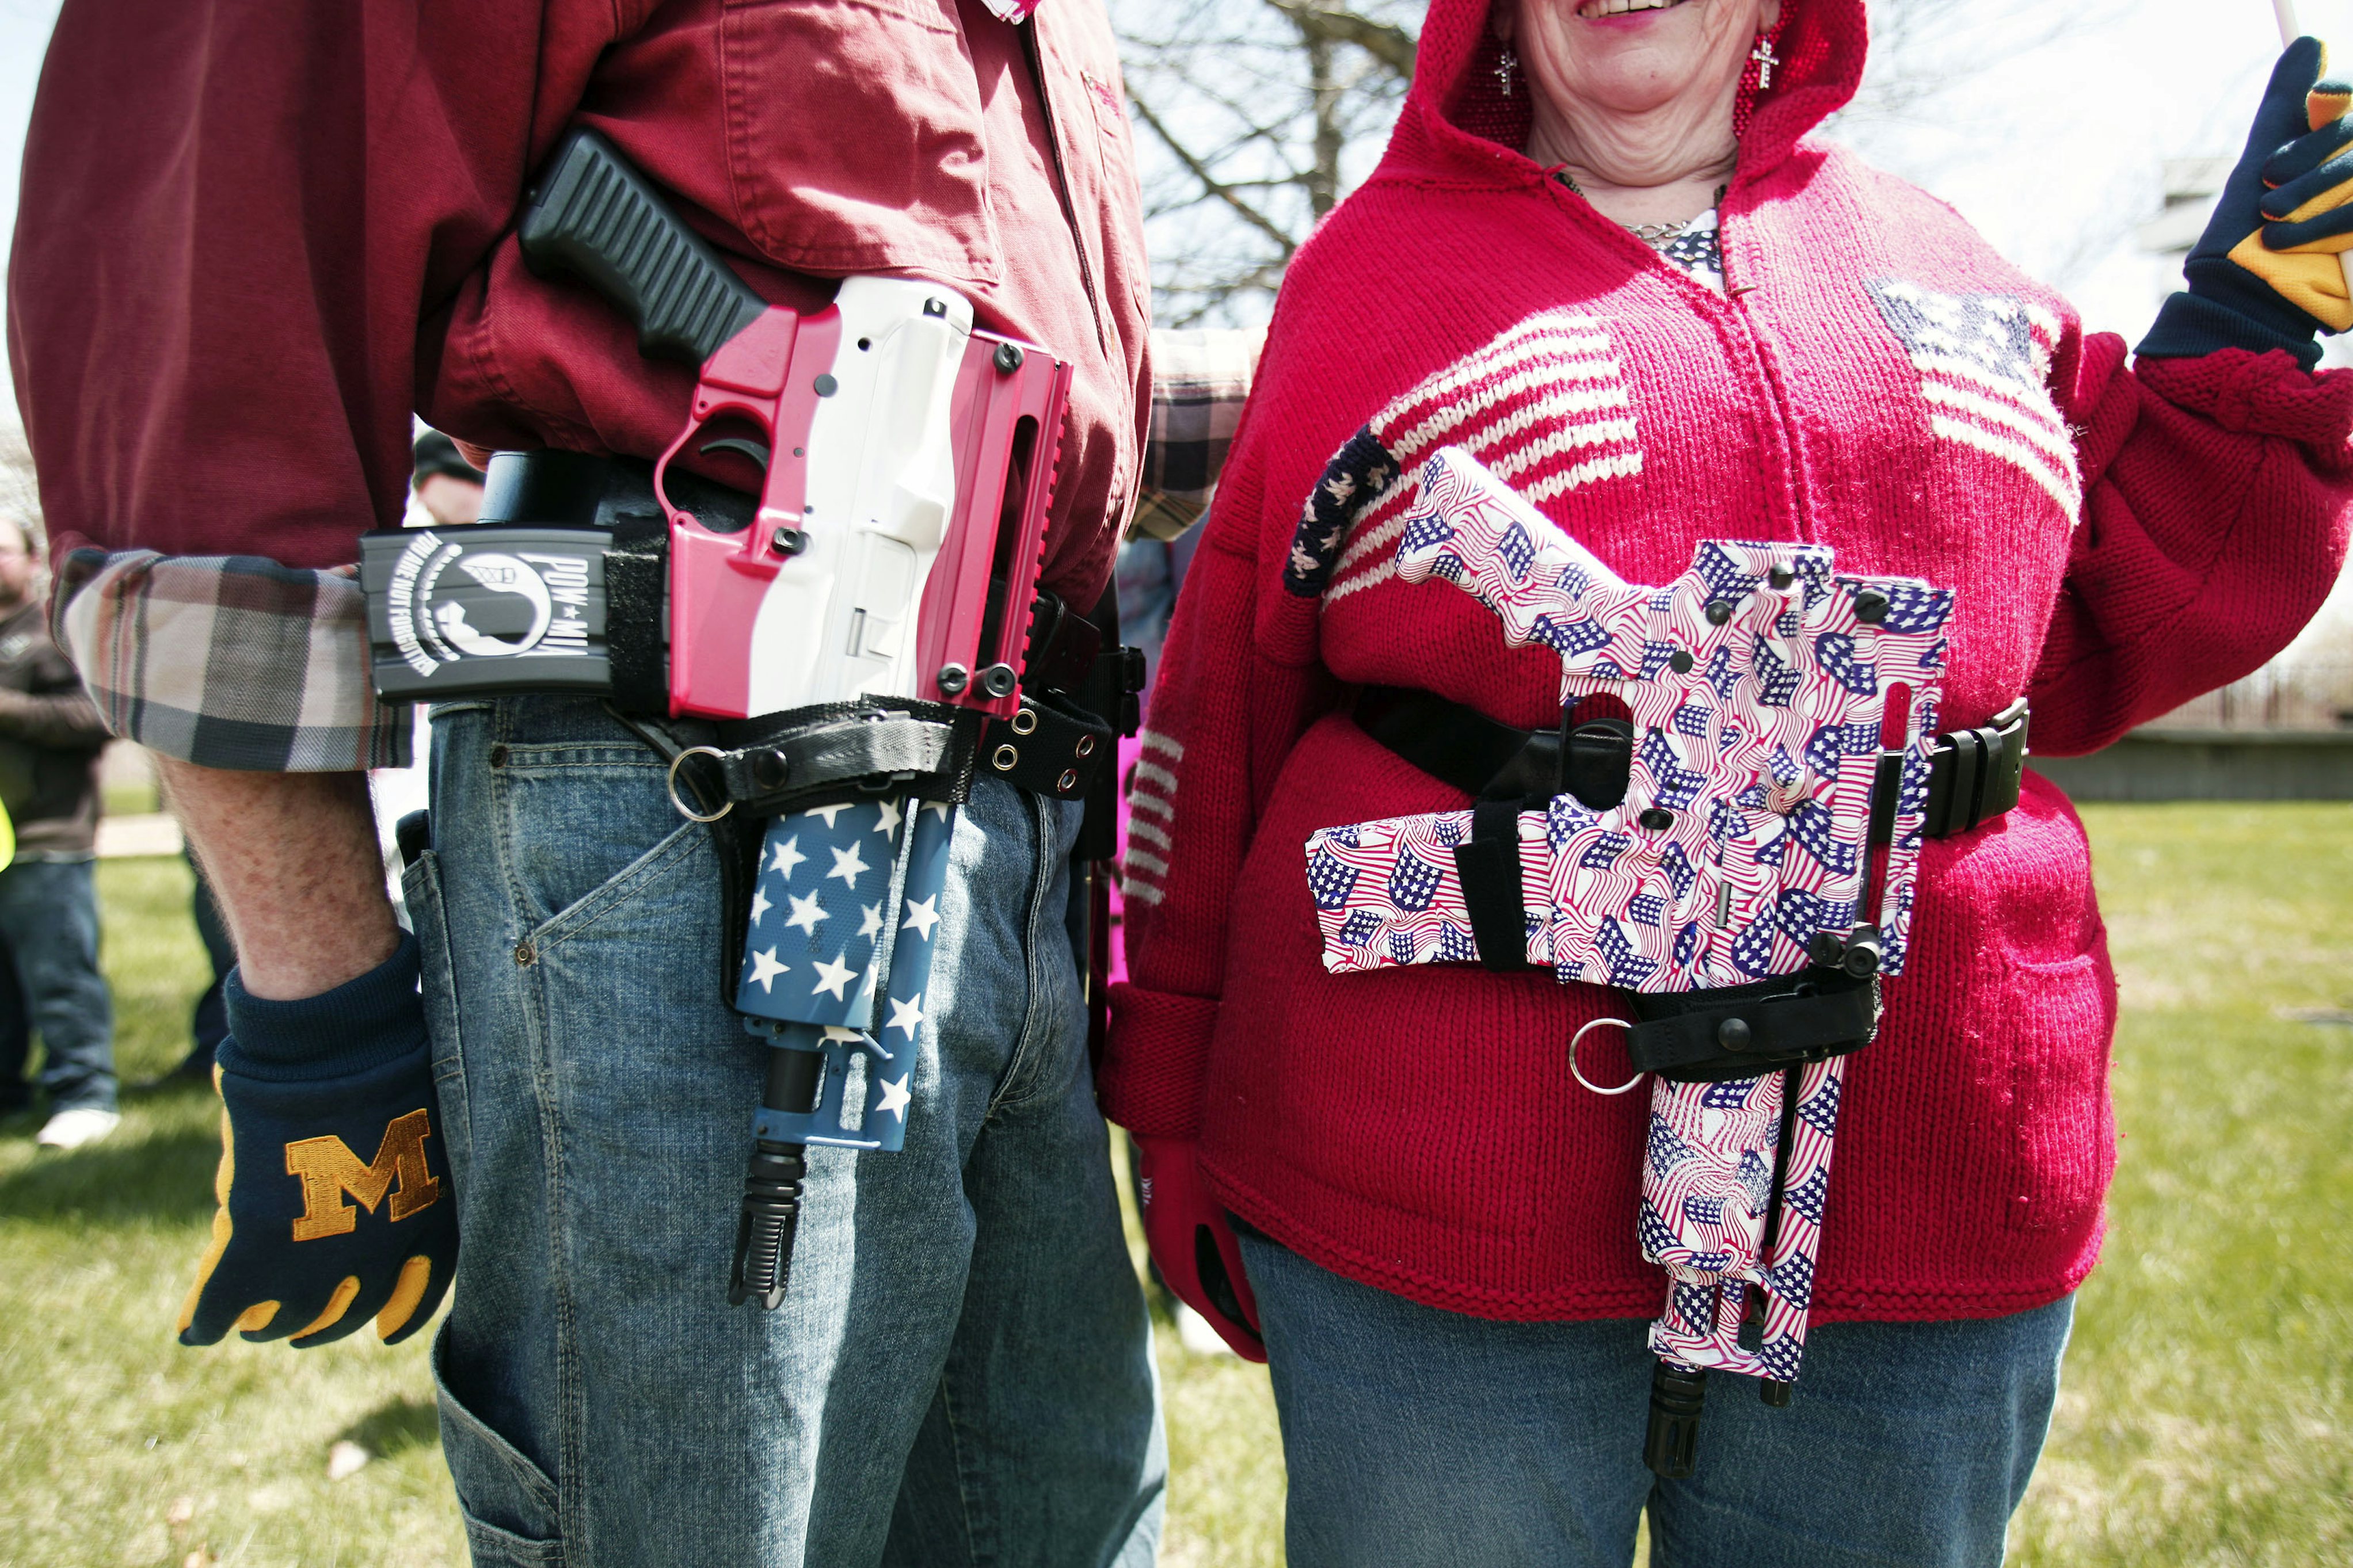 Texas’s new open carry law takes effect Friday, and churches